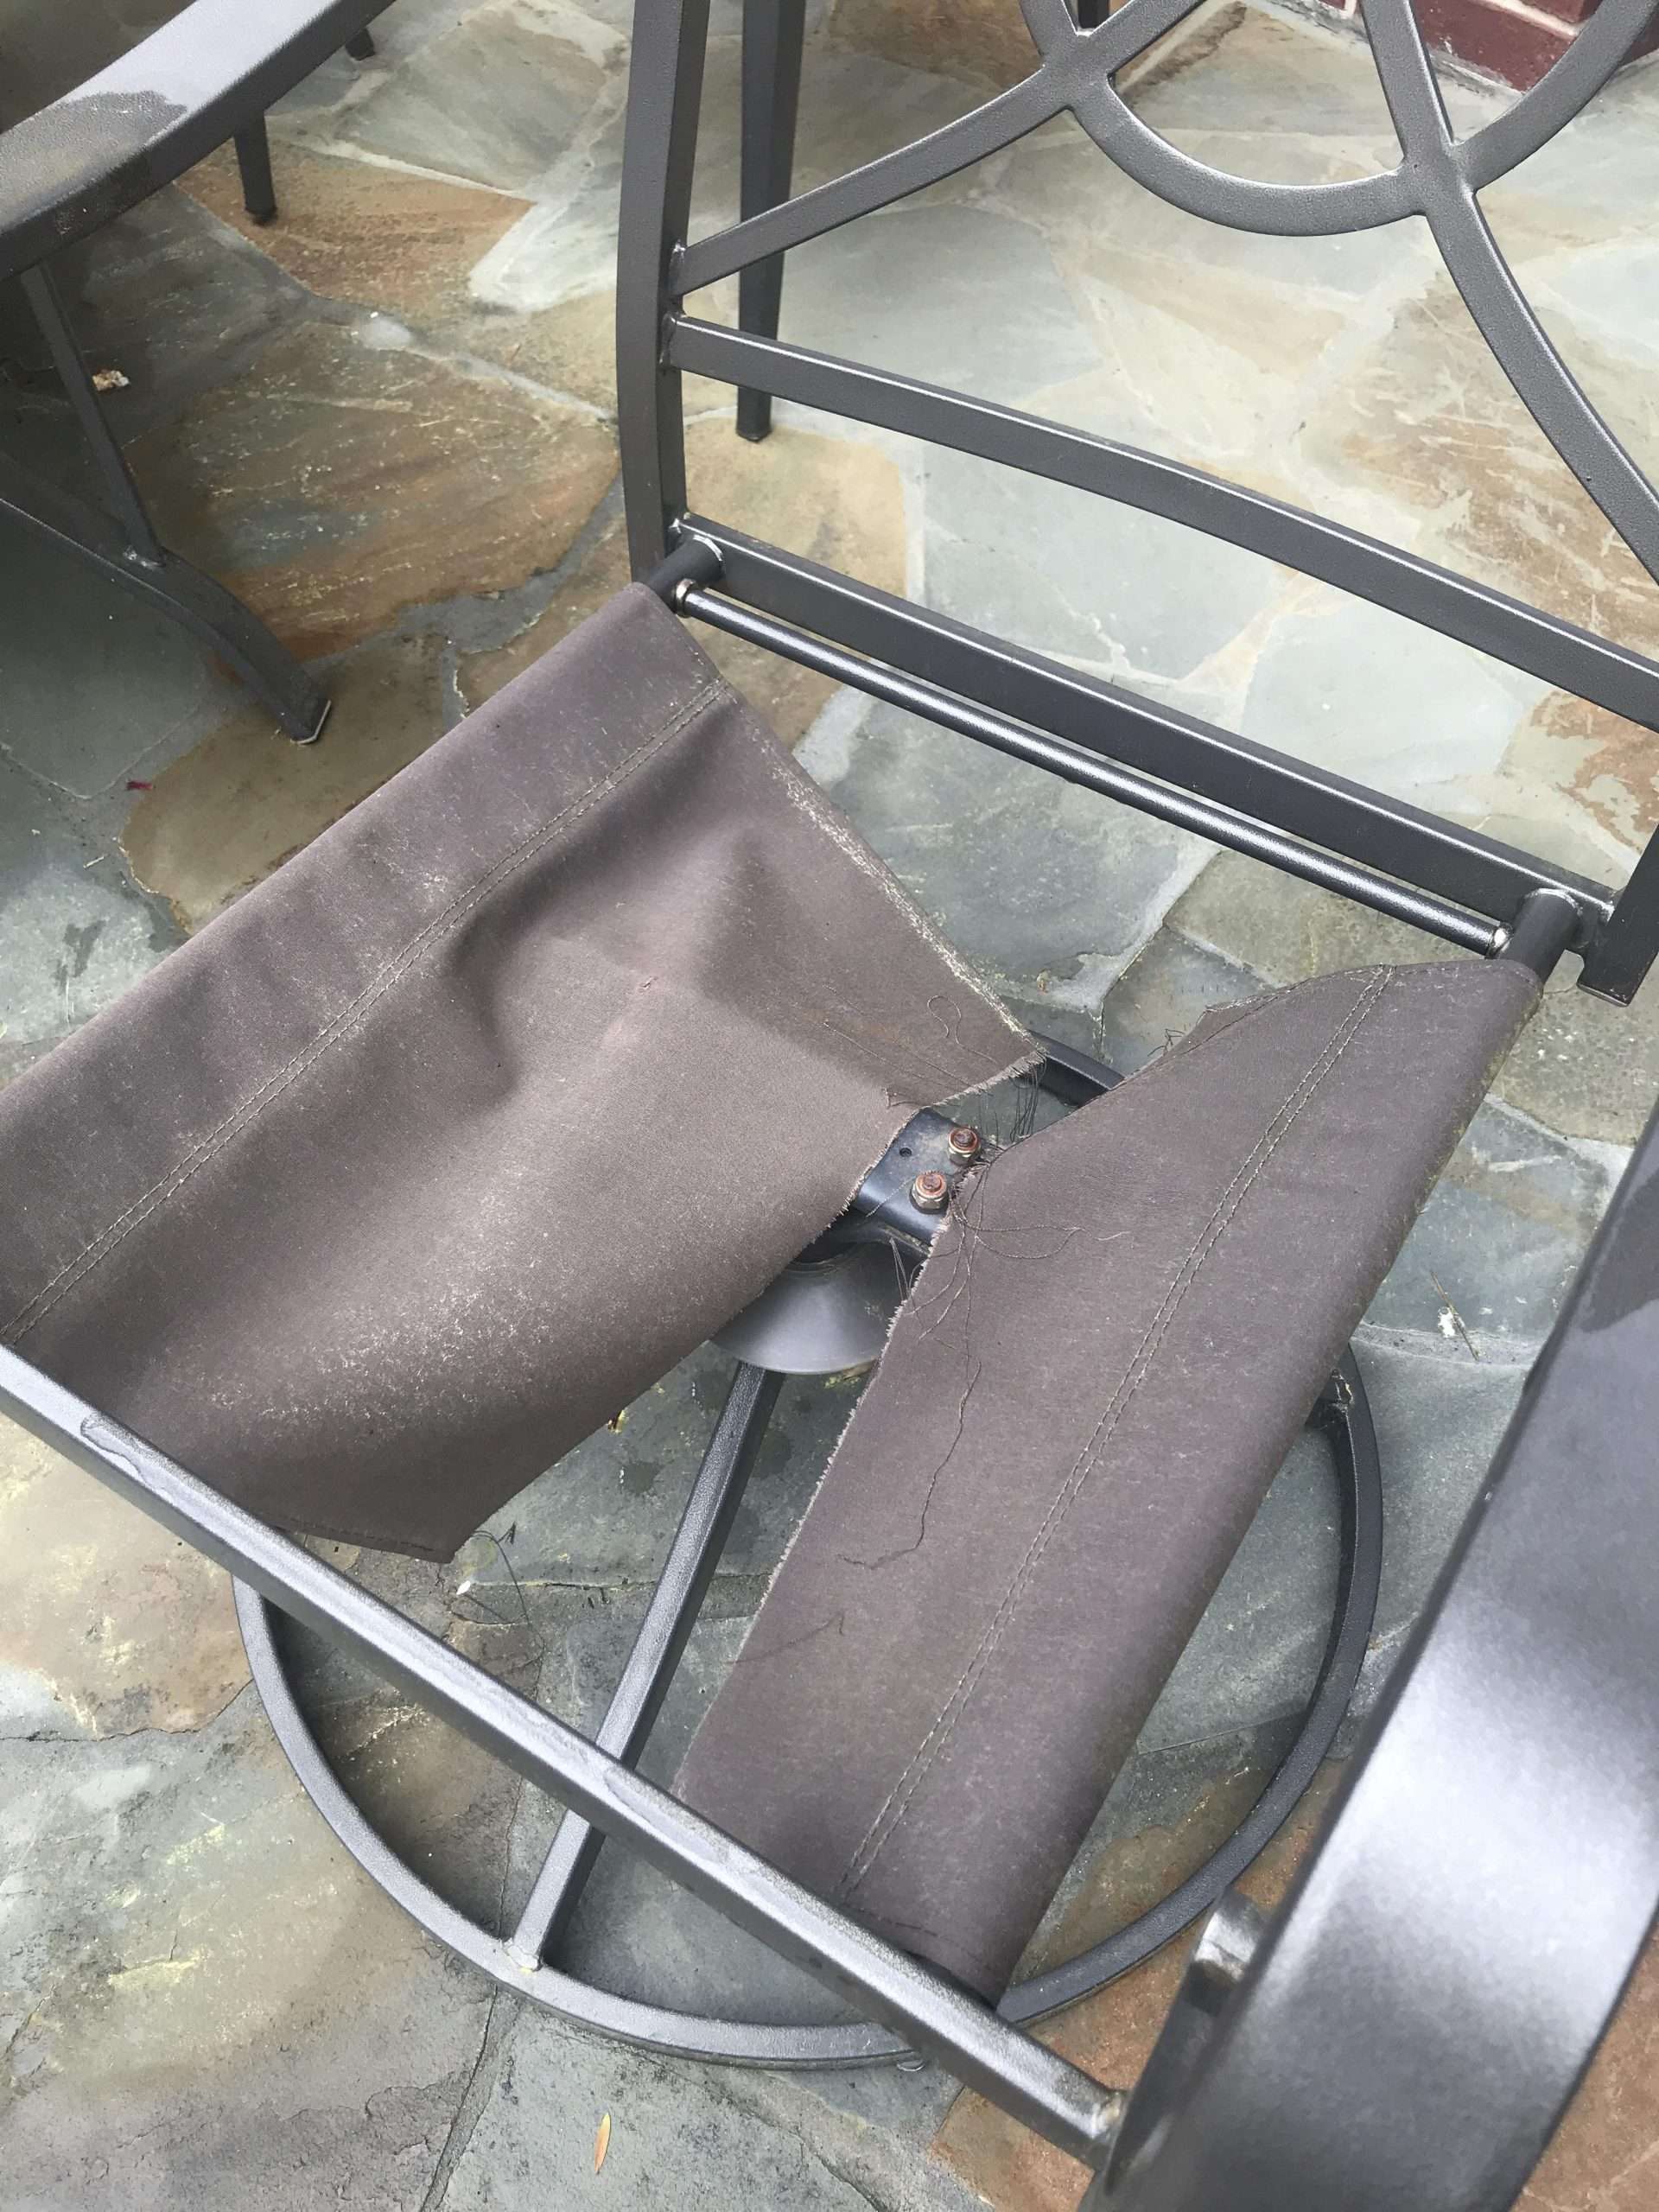 Fabric on patio chair ripped. Any ideas on what to use to ...